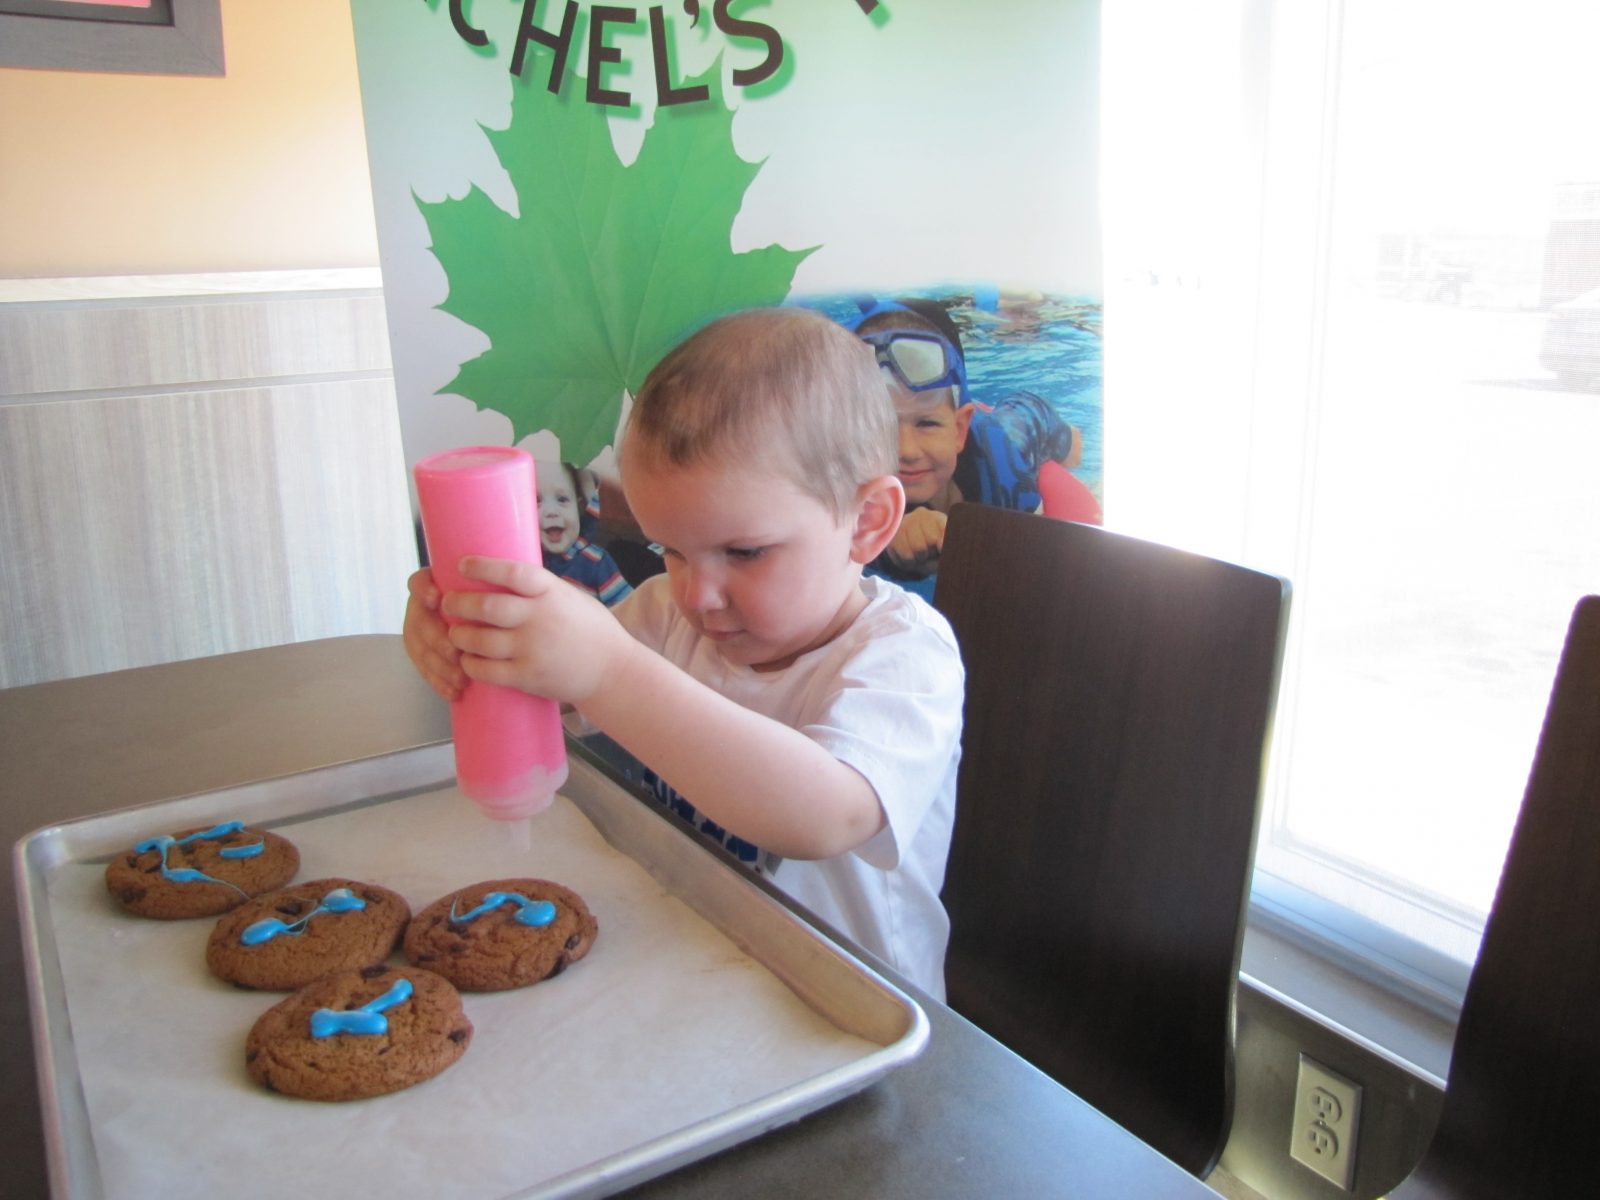 Local Tim Hortons support Rachel’s Kids with Smile Cookies